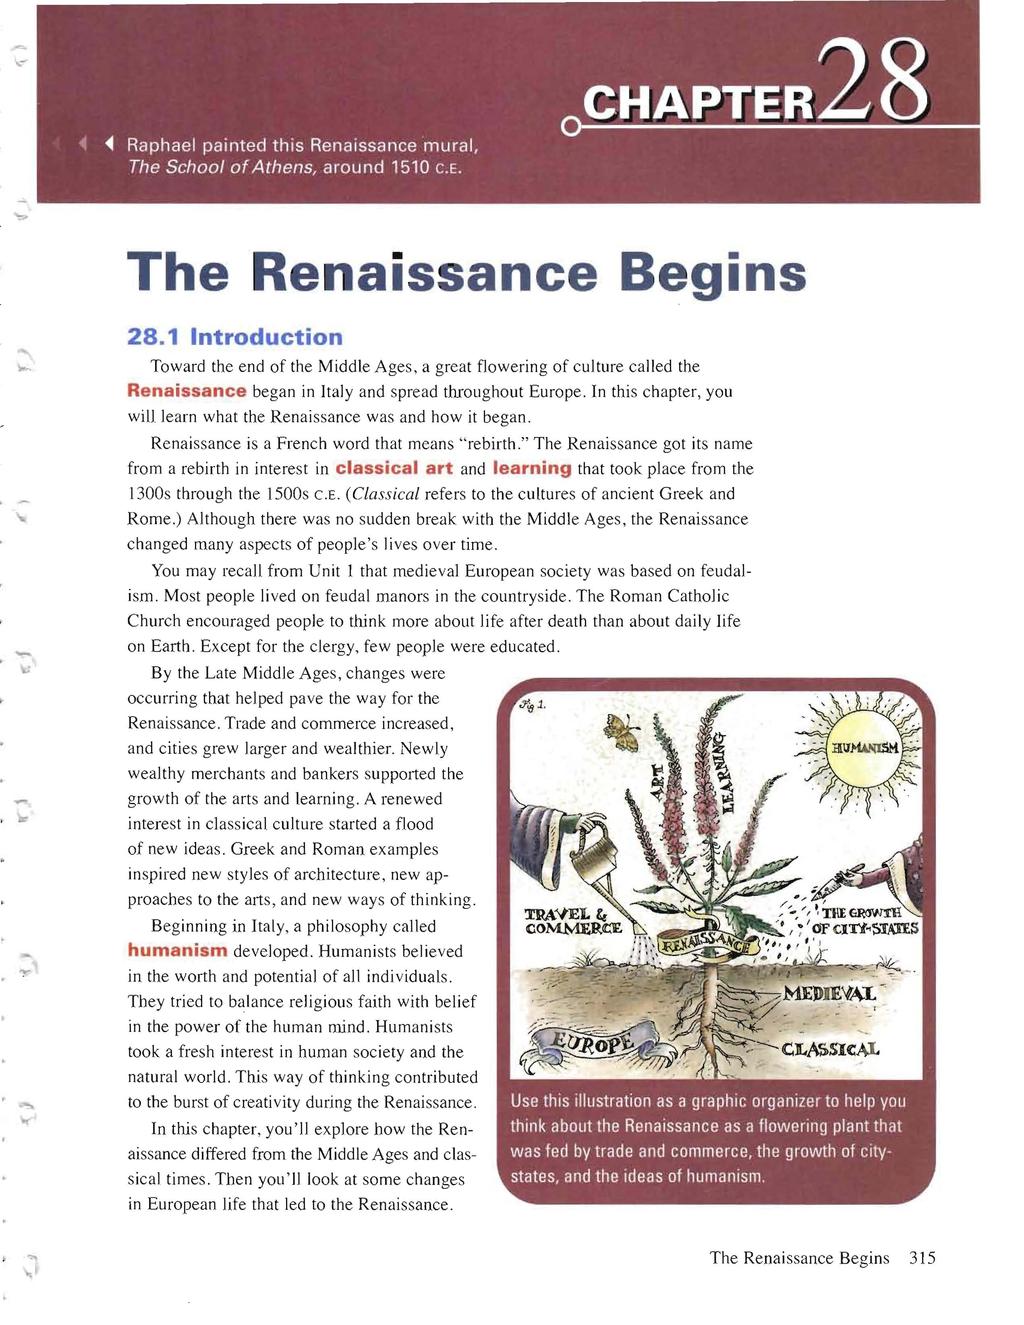 The Renaissance Begins 28.1 Introduction Toward the end of the Middle Ages, a great flowering of culture called the Renaissance began in Italy and spread throughout Europe.